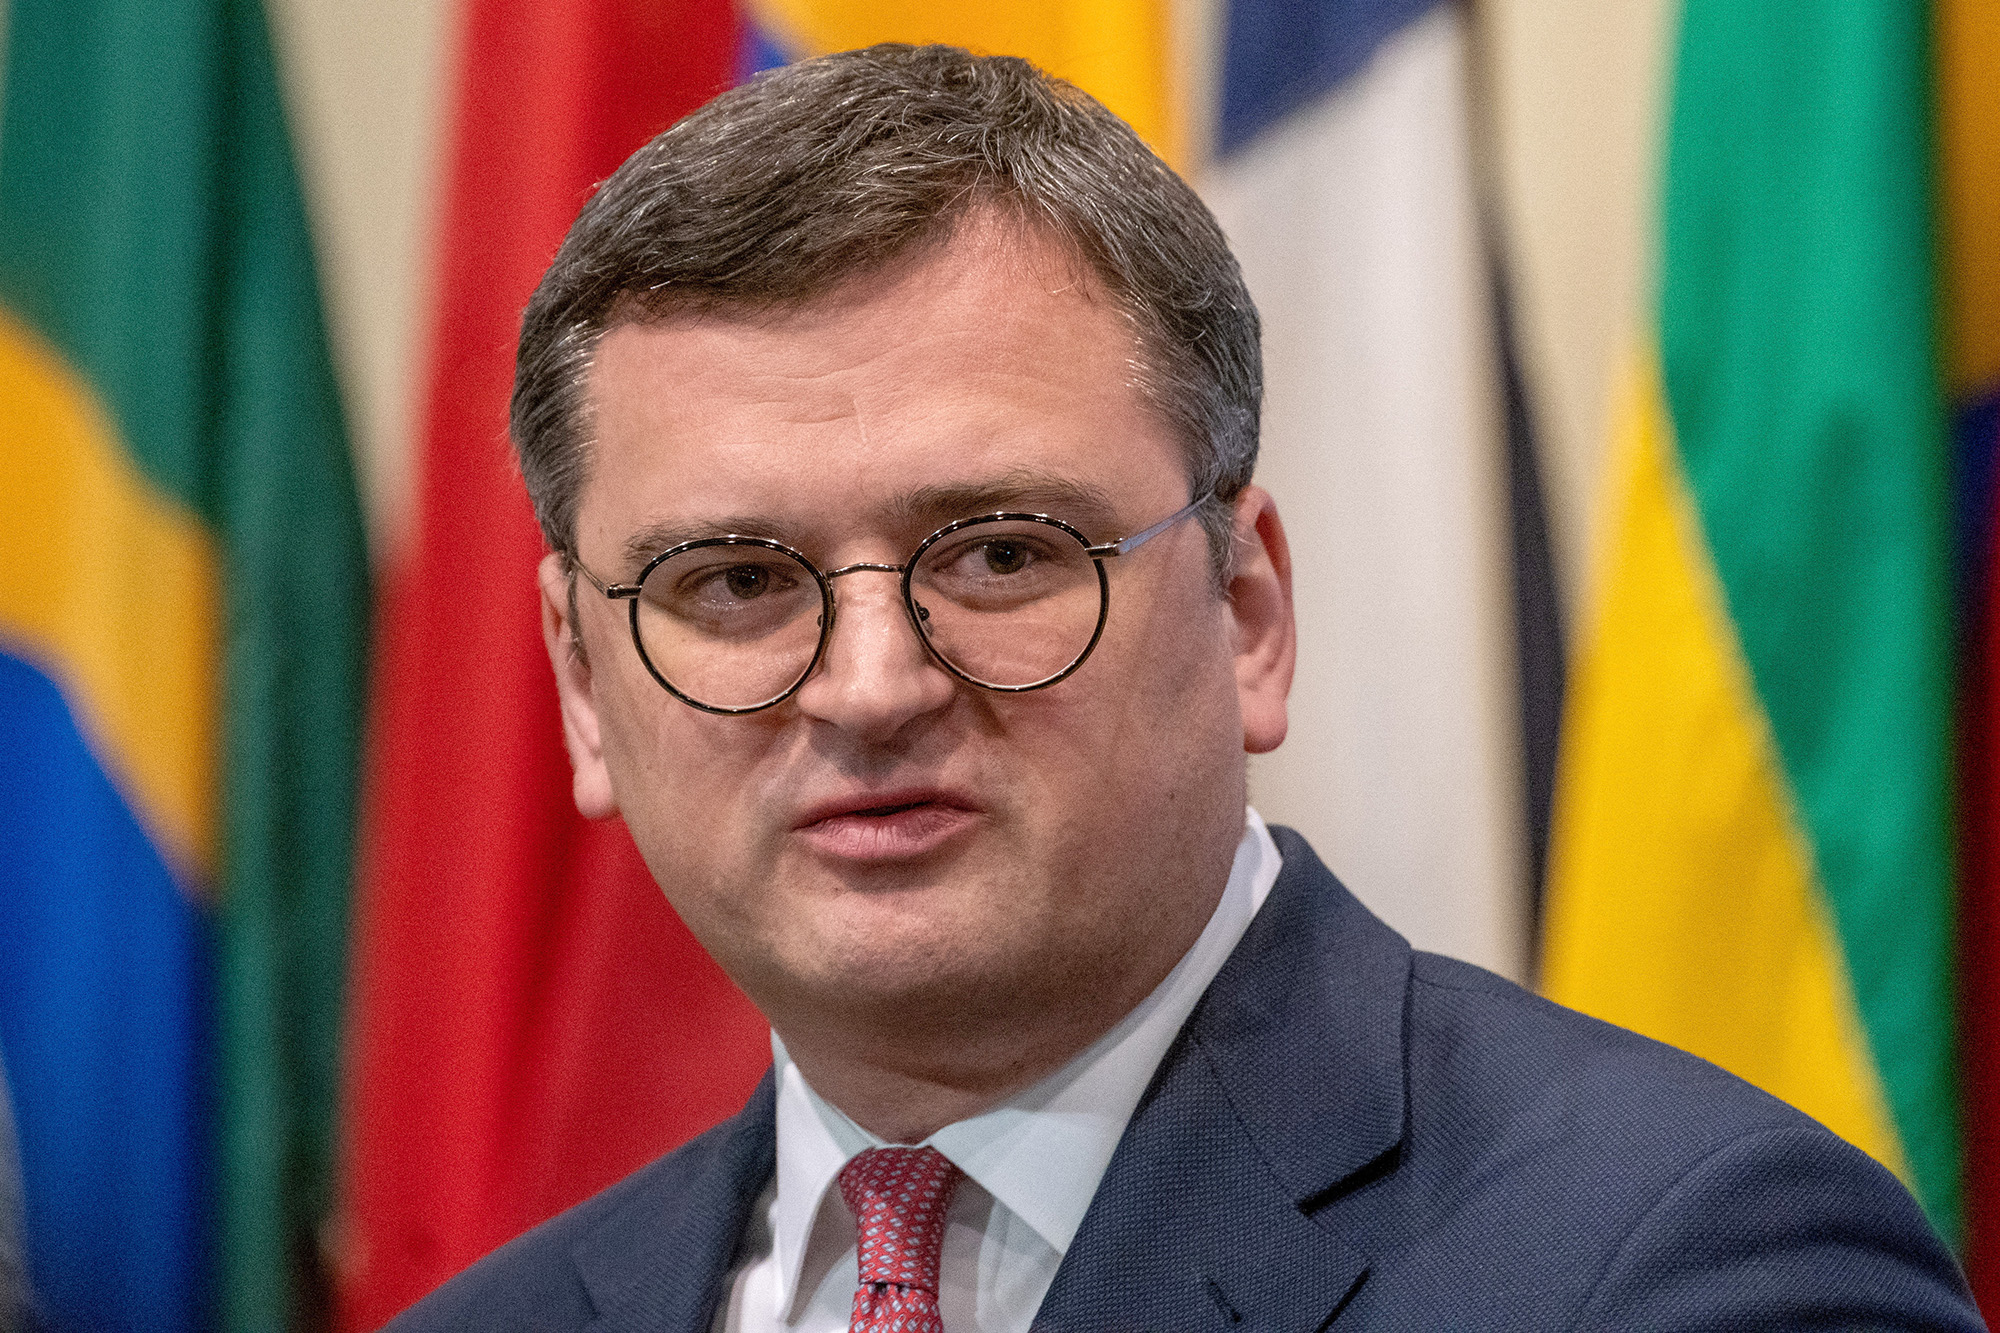 Ukrainian Minister of Foreign Affairs Dmytro Kuleba addresses the media during a press encounter at the United Nations at U.N. headquarters in New York City, on February 24.